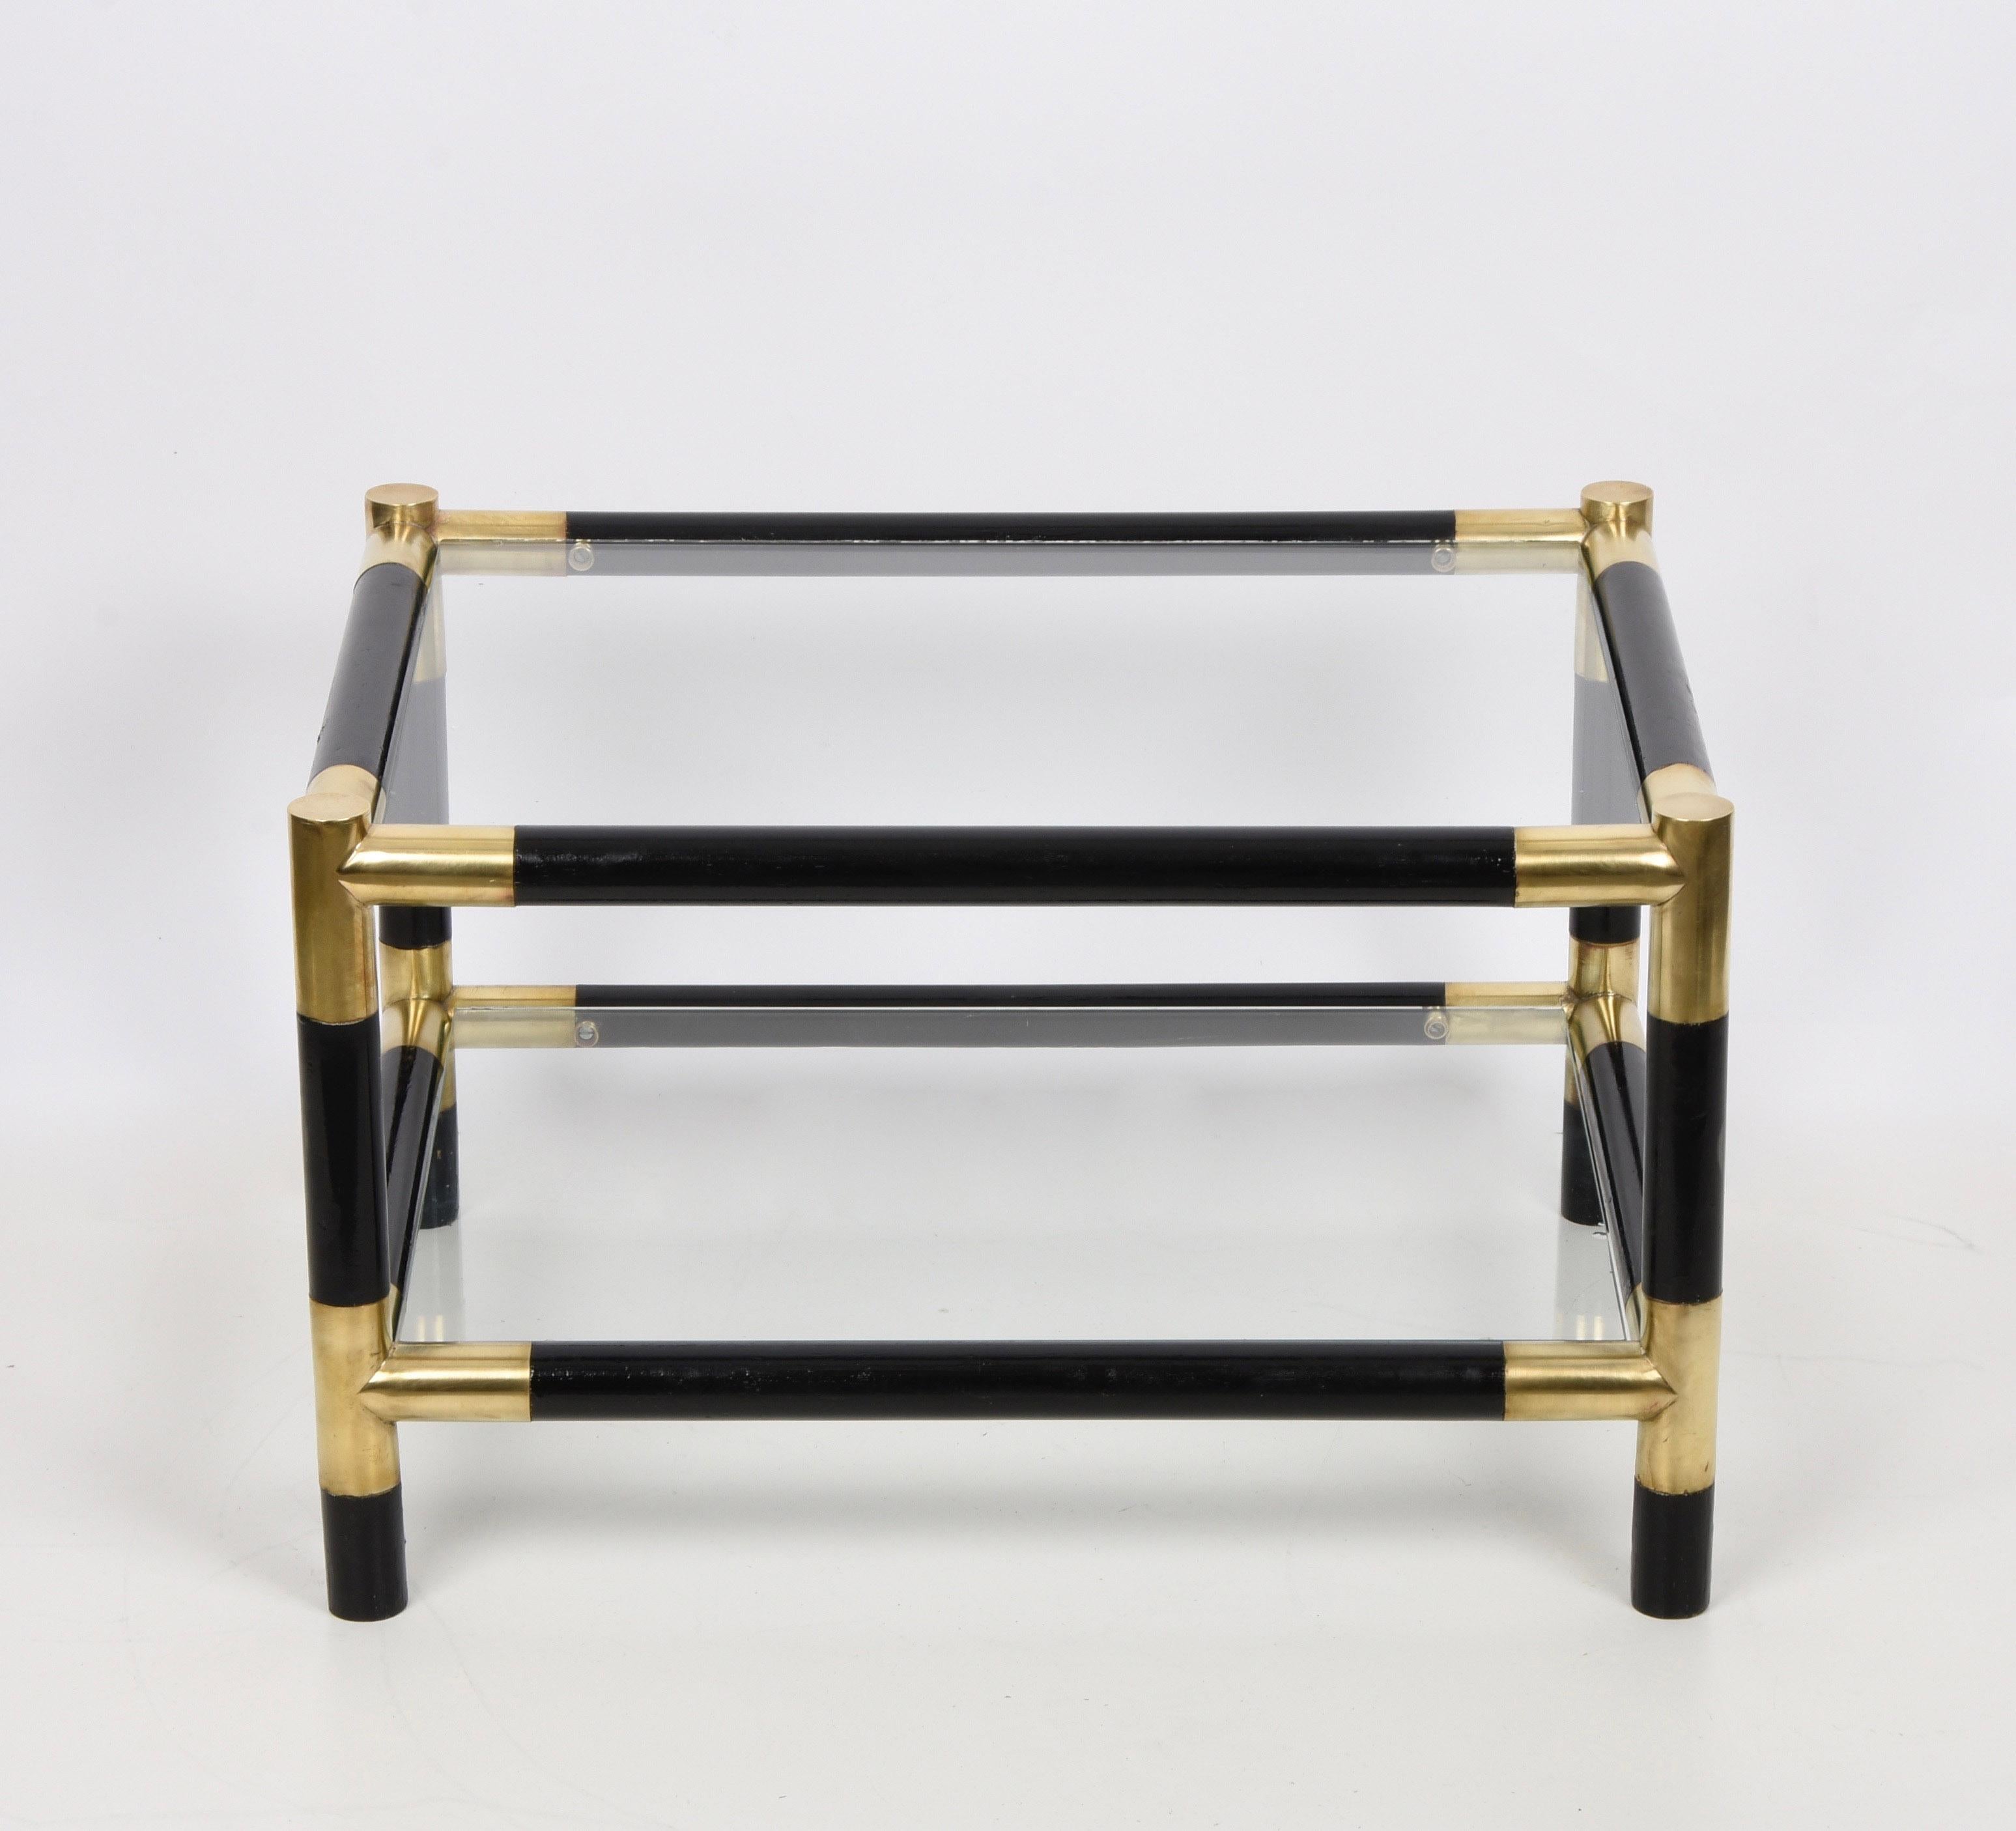 Late 20th Century Midcentury Wood and Brass Italian Side Table with Two Crystal Shelves, 1970s For Sale